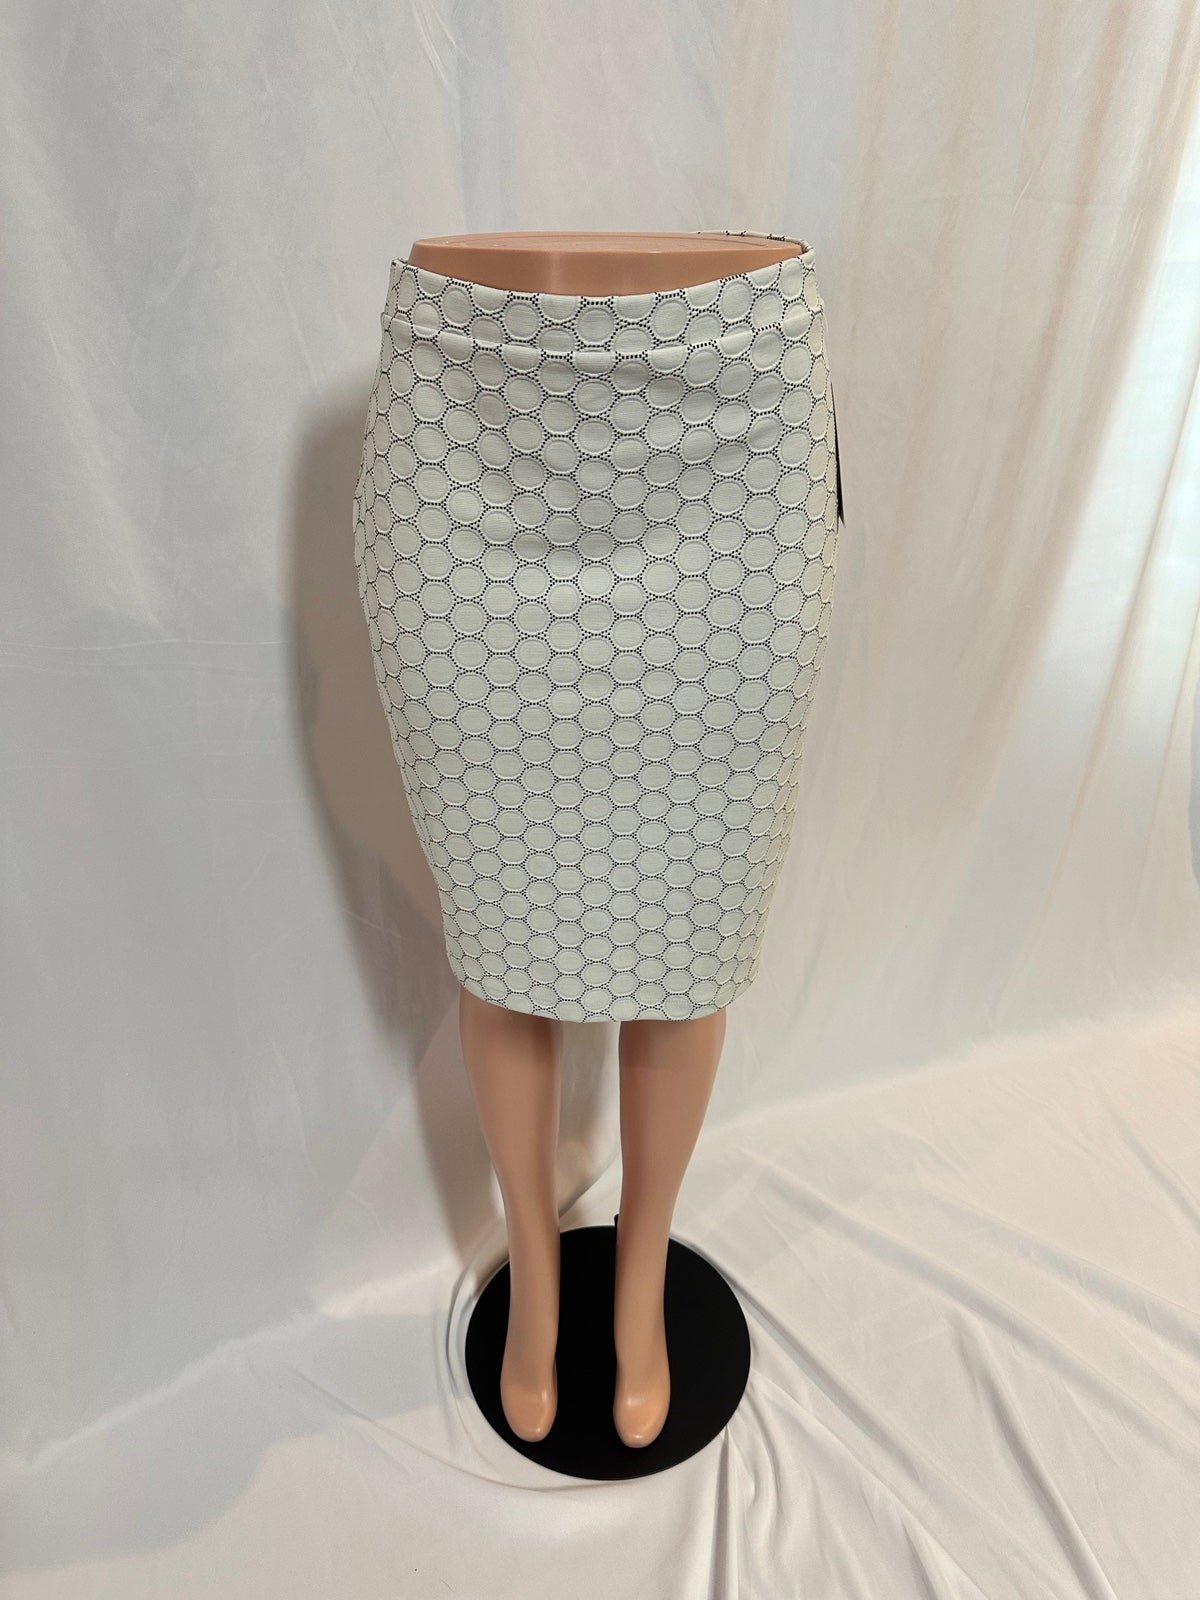 save up to 70% NWT Leota Ivory Black Dot Luxe Jacquard 